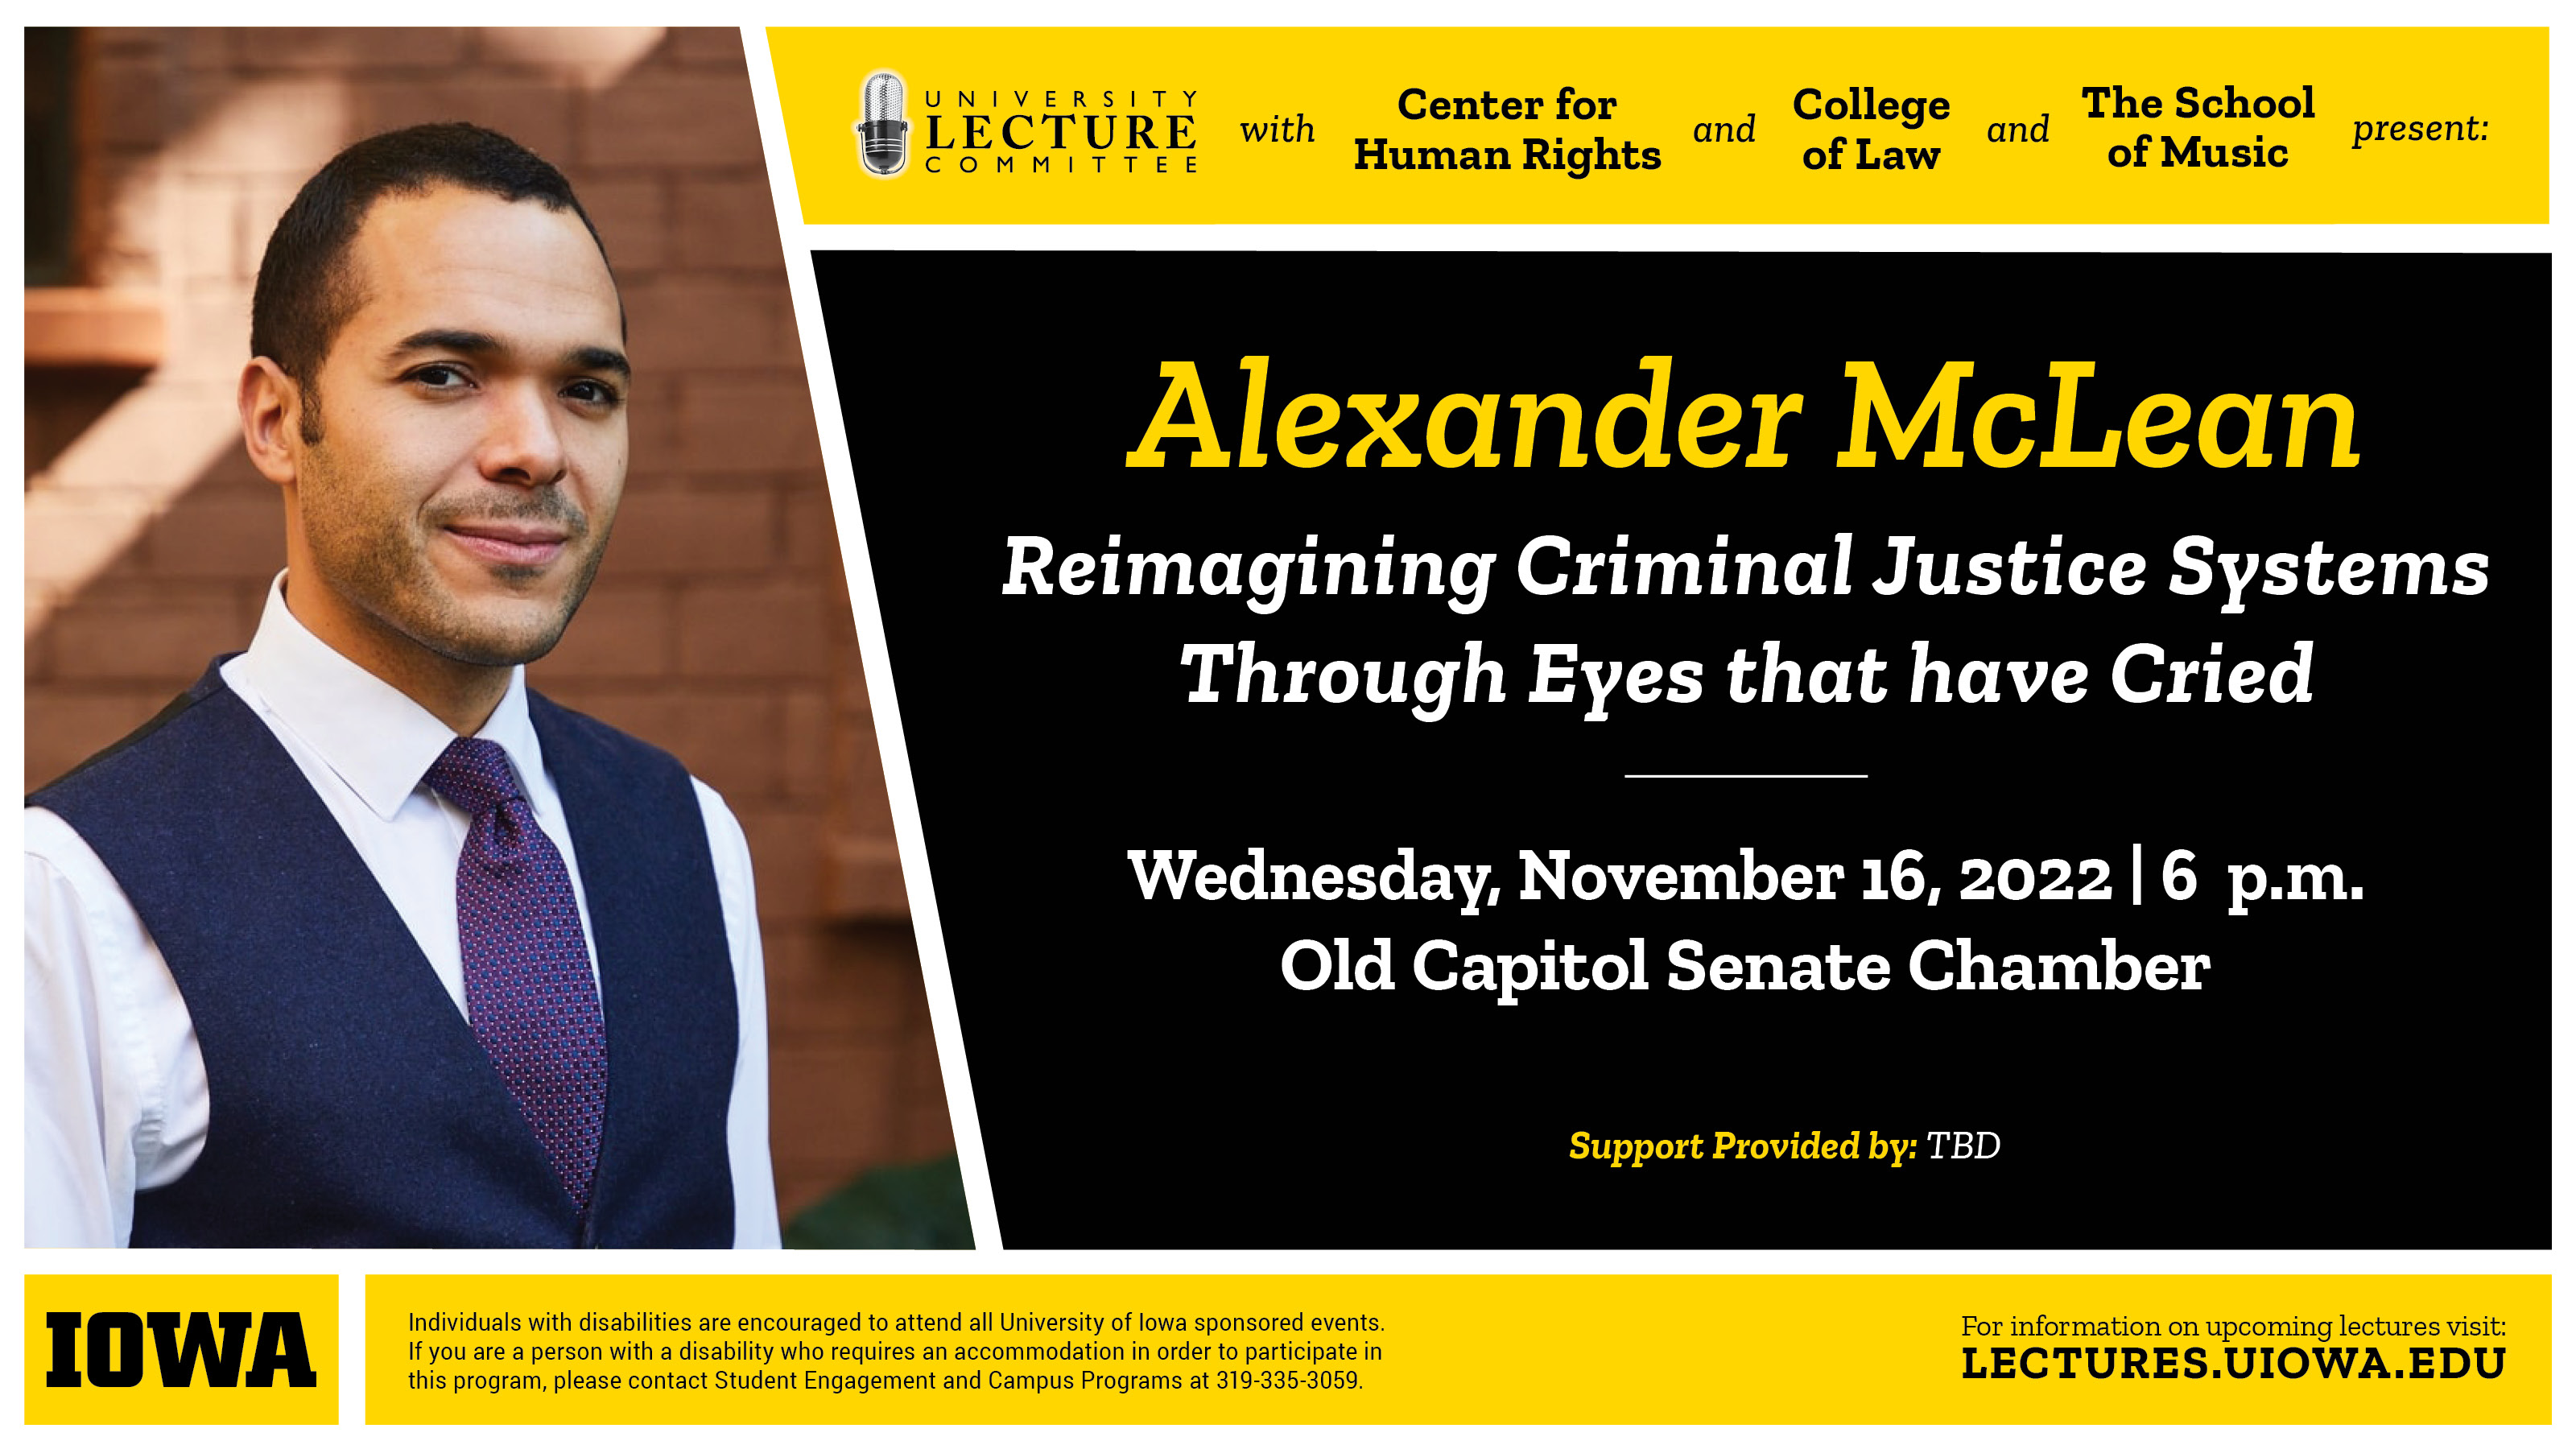 Alexander McLean    Reimagining Criminal Justice Systems Through Eyes that Have Cried    Wednesday, November 16, 2022 6pm    Old Capitol Senate Chamber